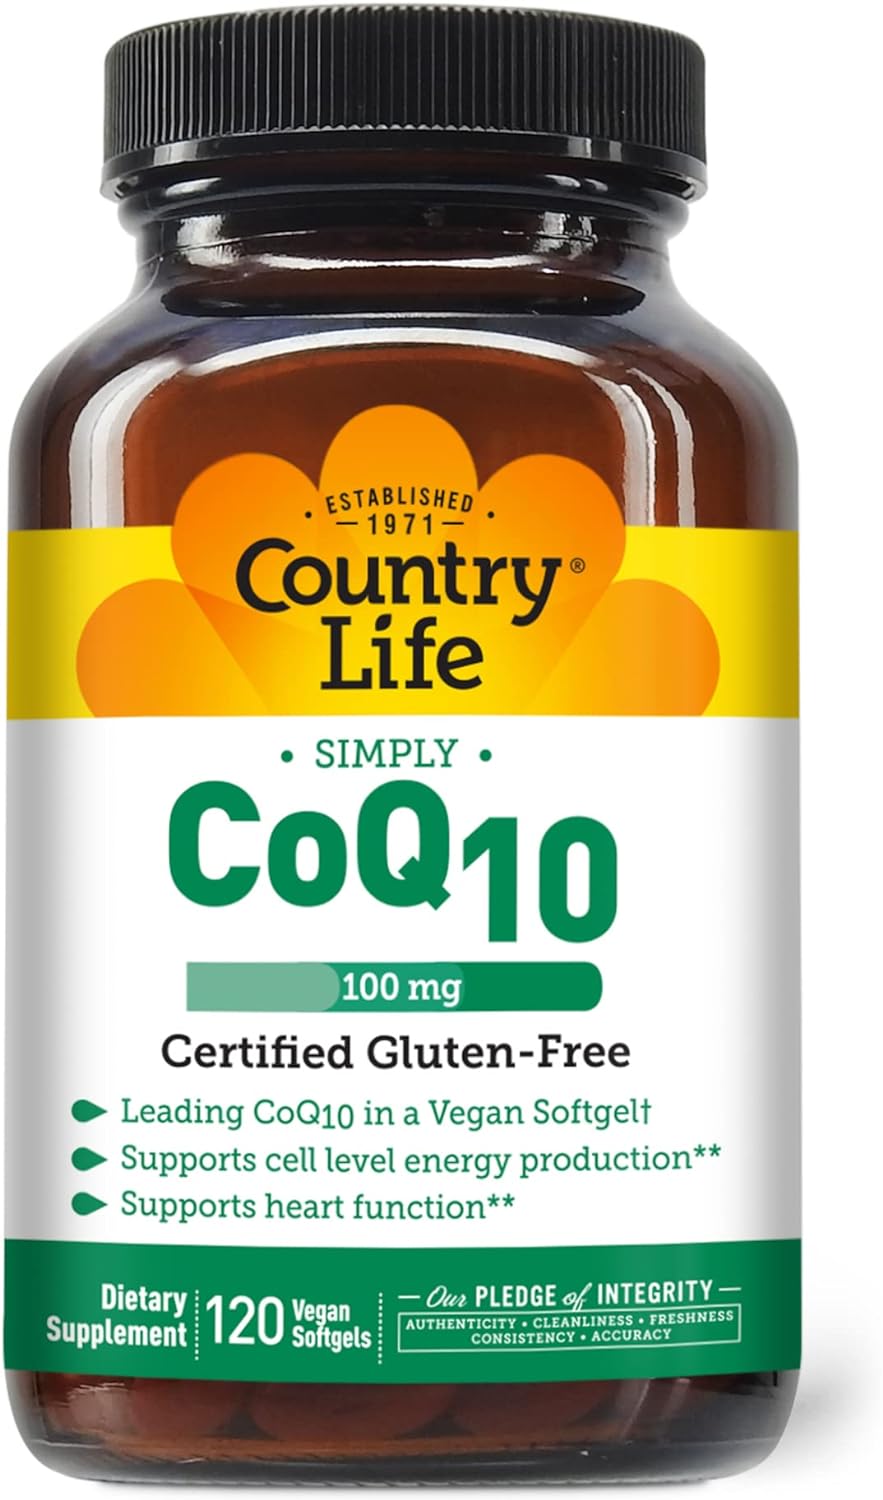 Country Life Simply CoQ10, Supports Heart Function, 100mg, 120 Softgels, Certified Gluten Free, Certified Vegan